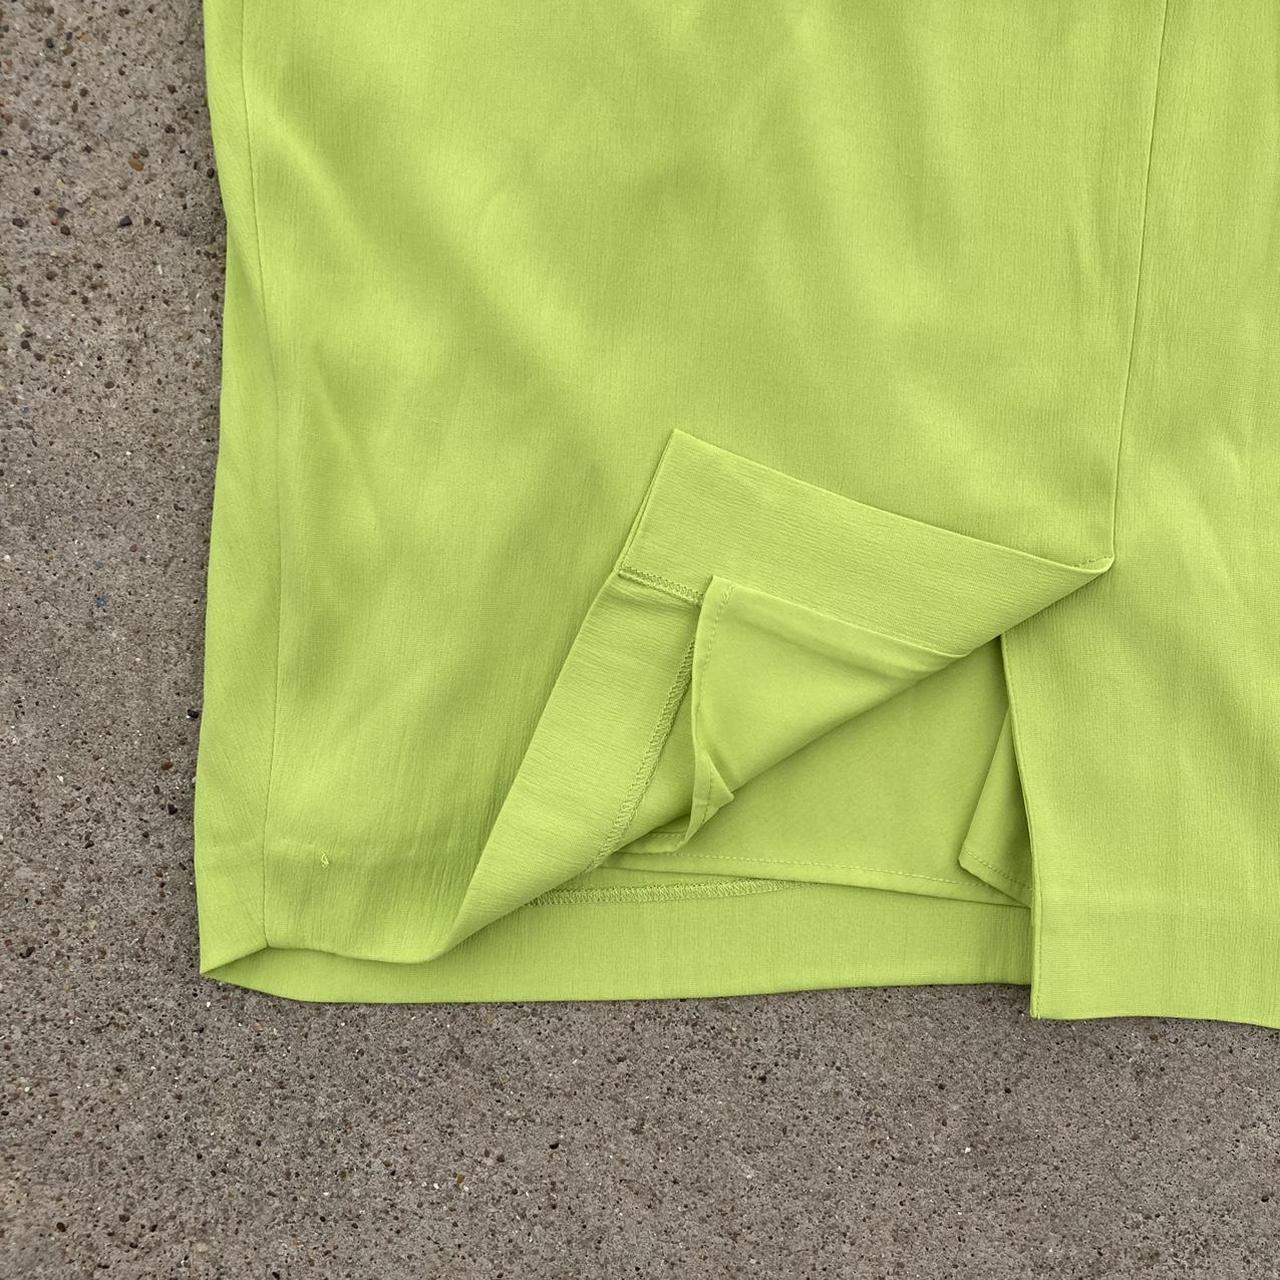 It's Official: Chartreuse Is the New Slime Green